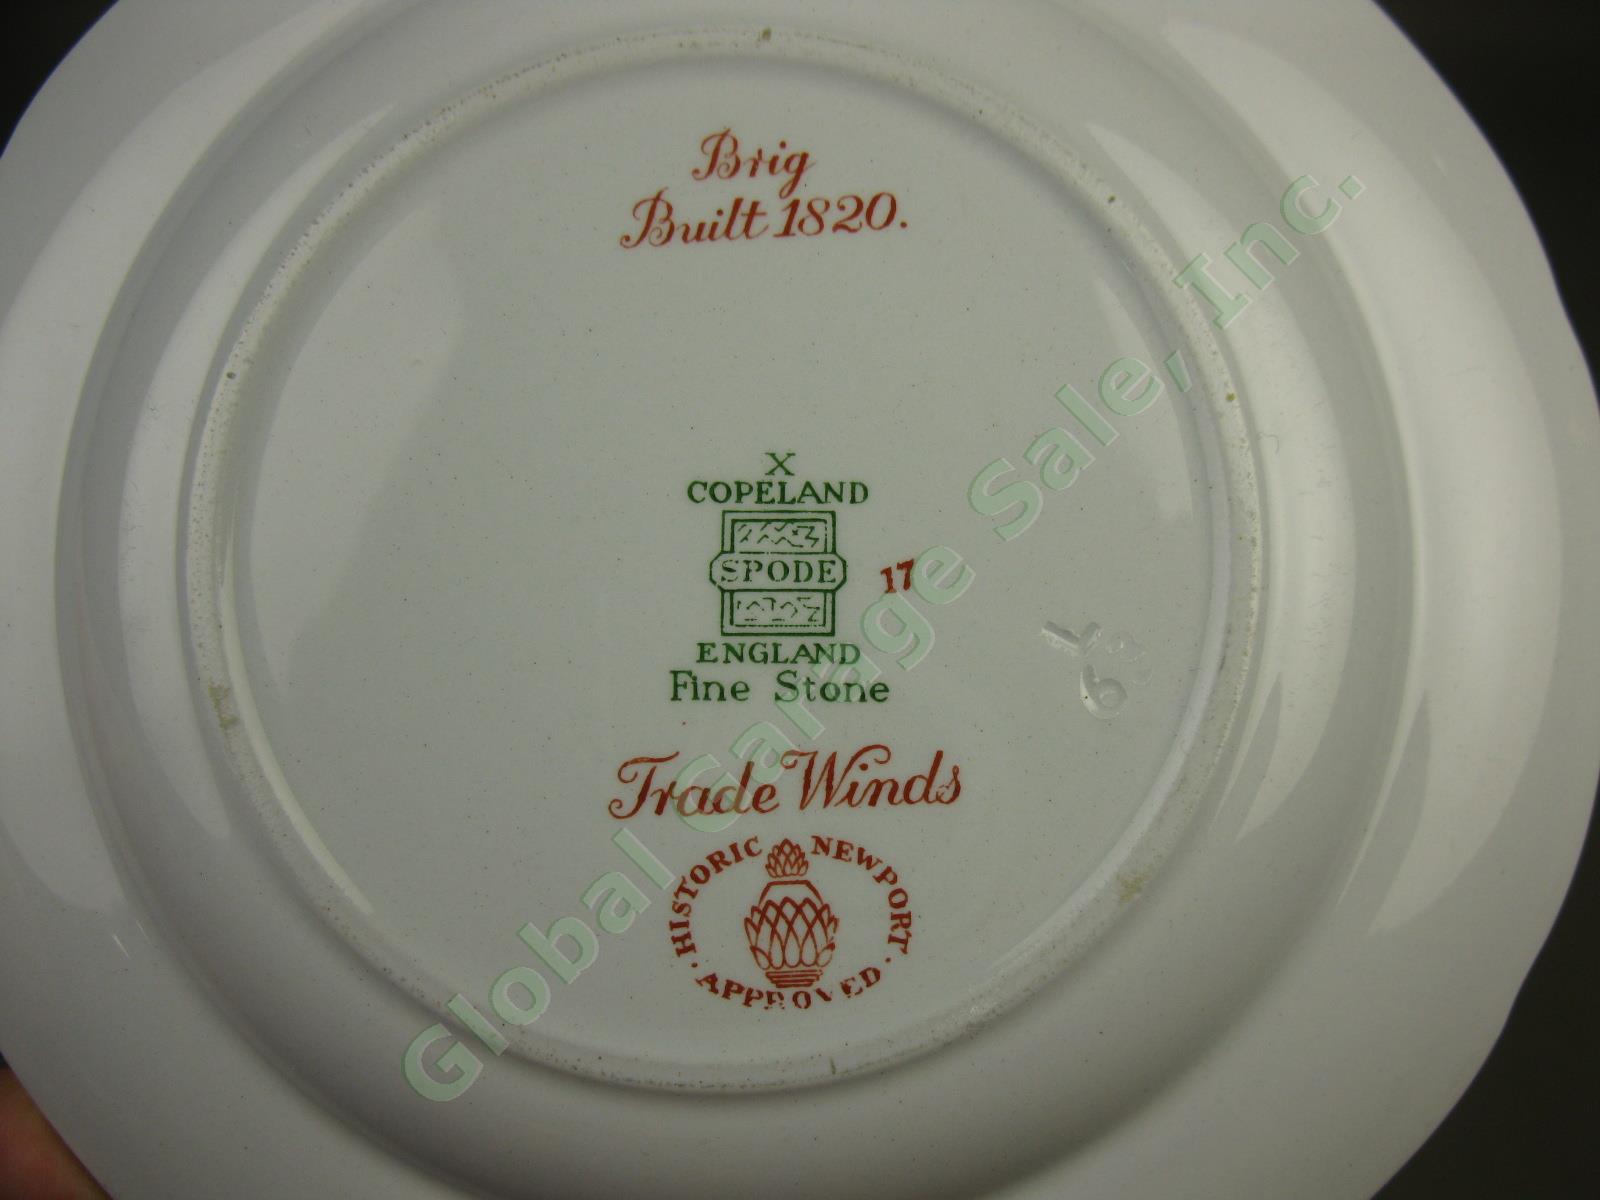 6 Spode Trade Winds Red Pattern Gold Trim Sail Ship W128 6" Bread &Butter Plates 4